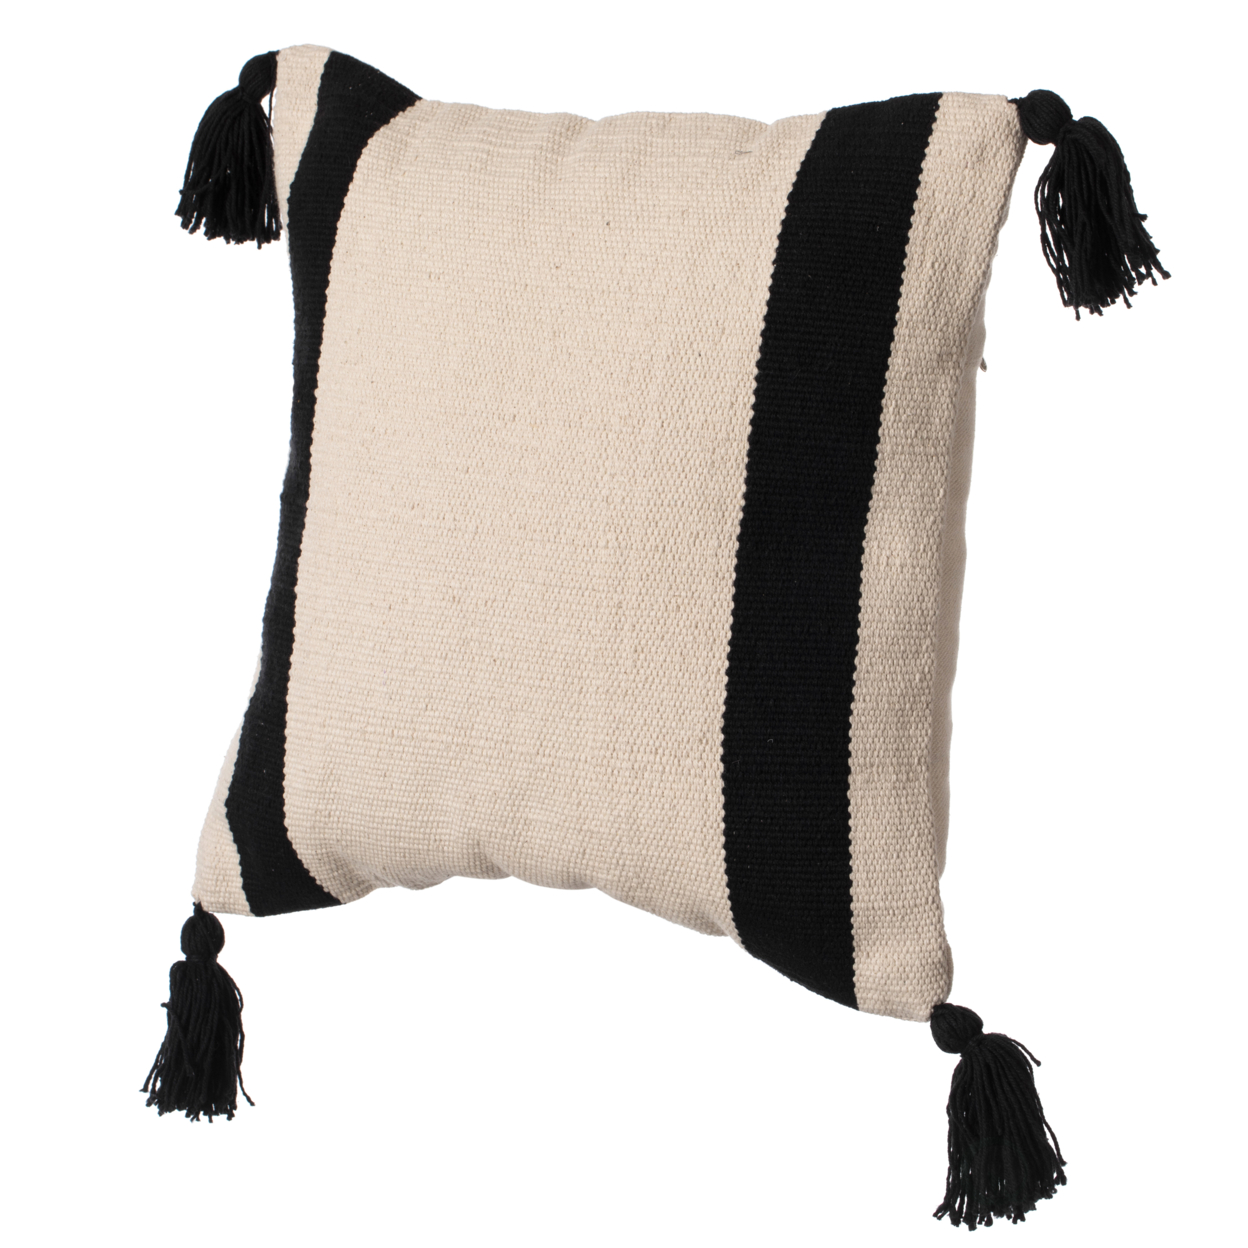 16 Handwoven Cotton Throw Pillow Cover With Side Stripes - Black